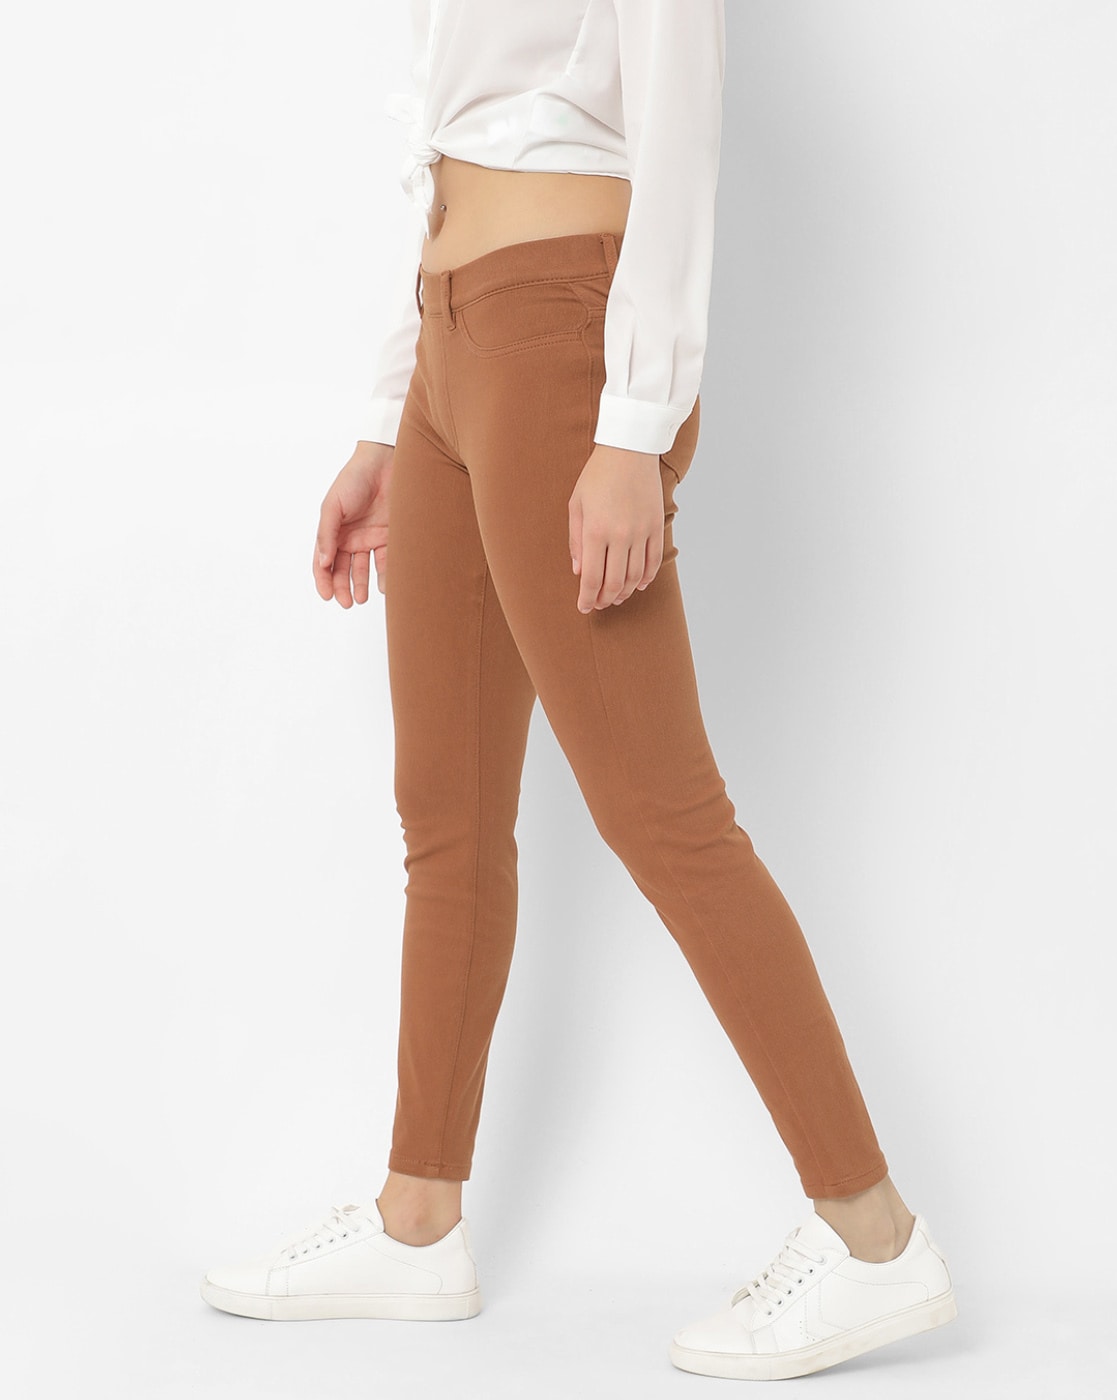 Buy Brown Skinny Fit Knitted Stretch Jeans Online at Muftijeans